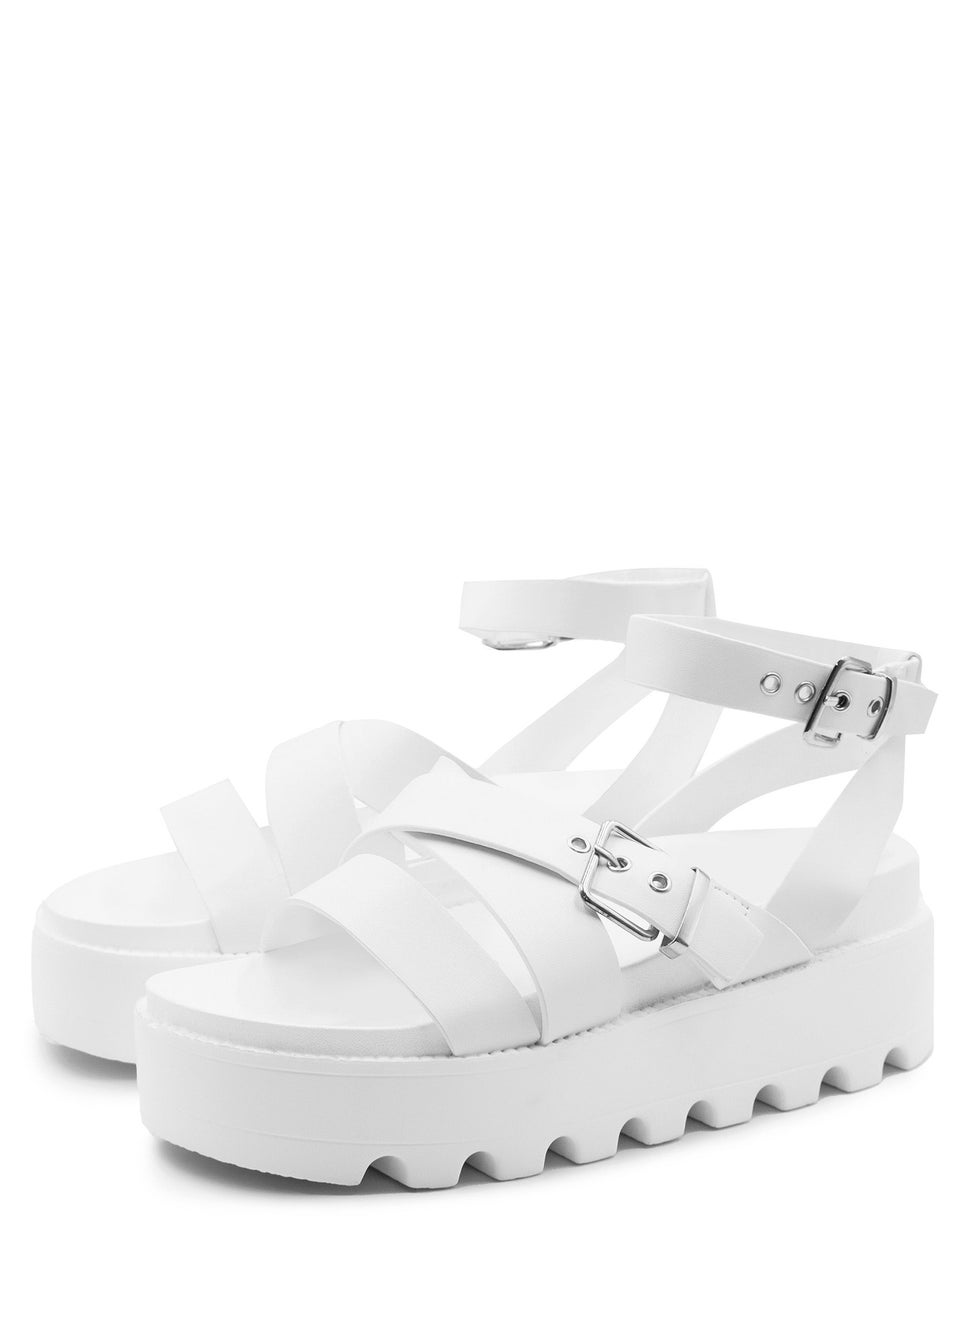 Where's That From White Pu Layla Buckle Strap Platform Sandals